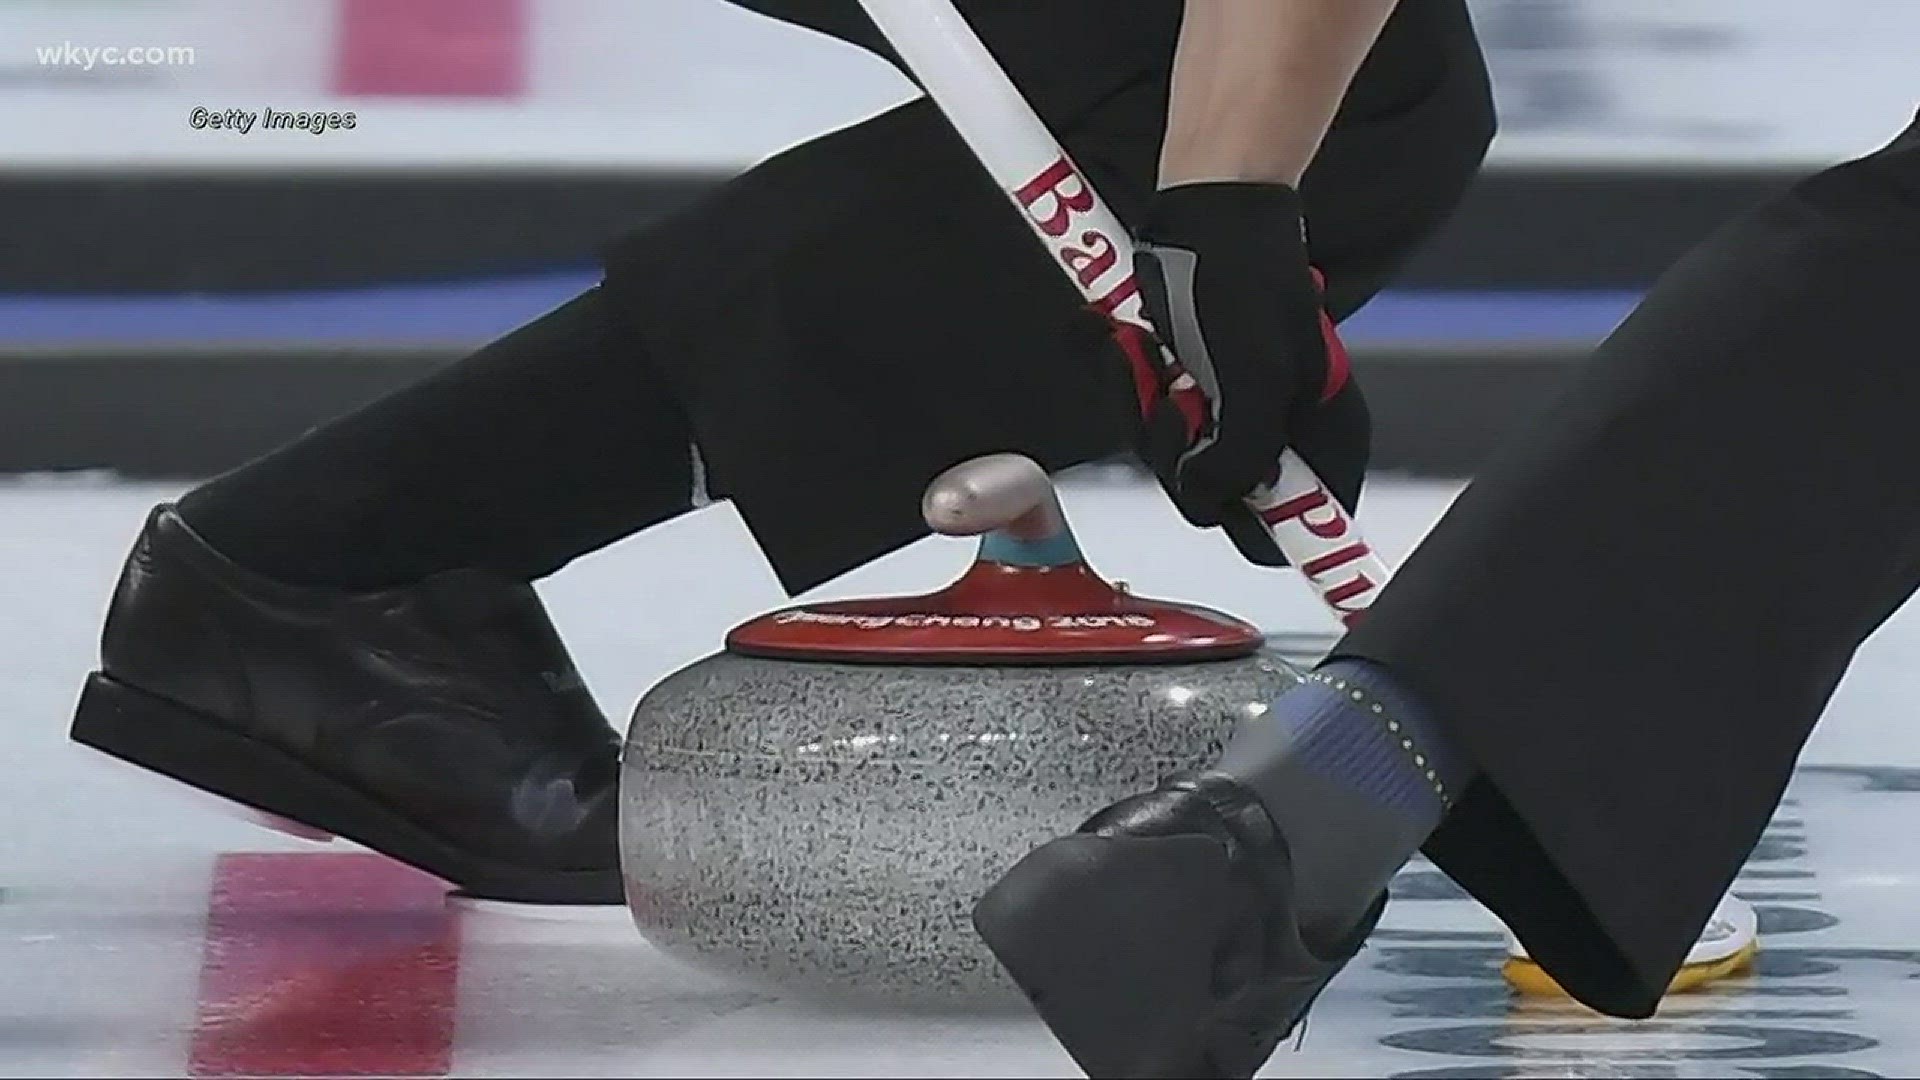 South Korea Today: Curling 101 with Team USA